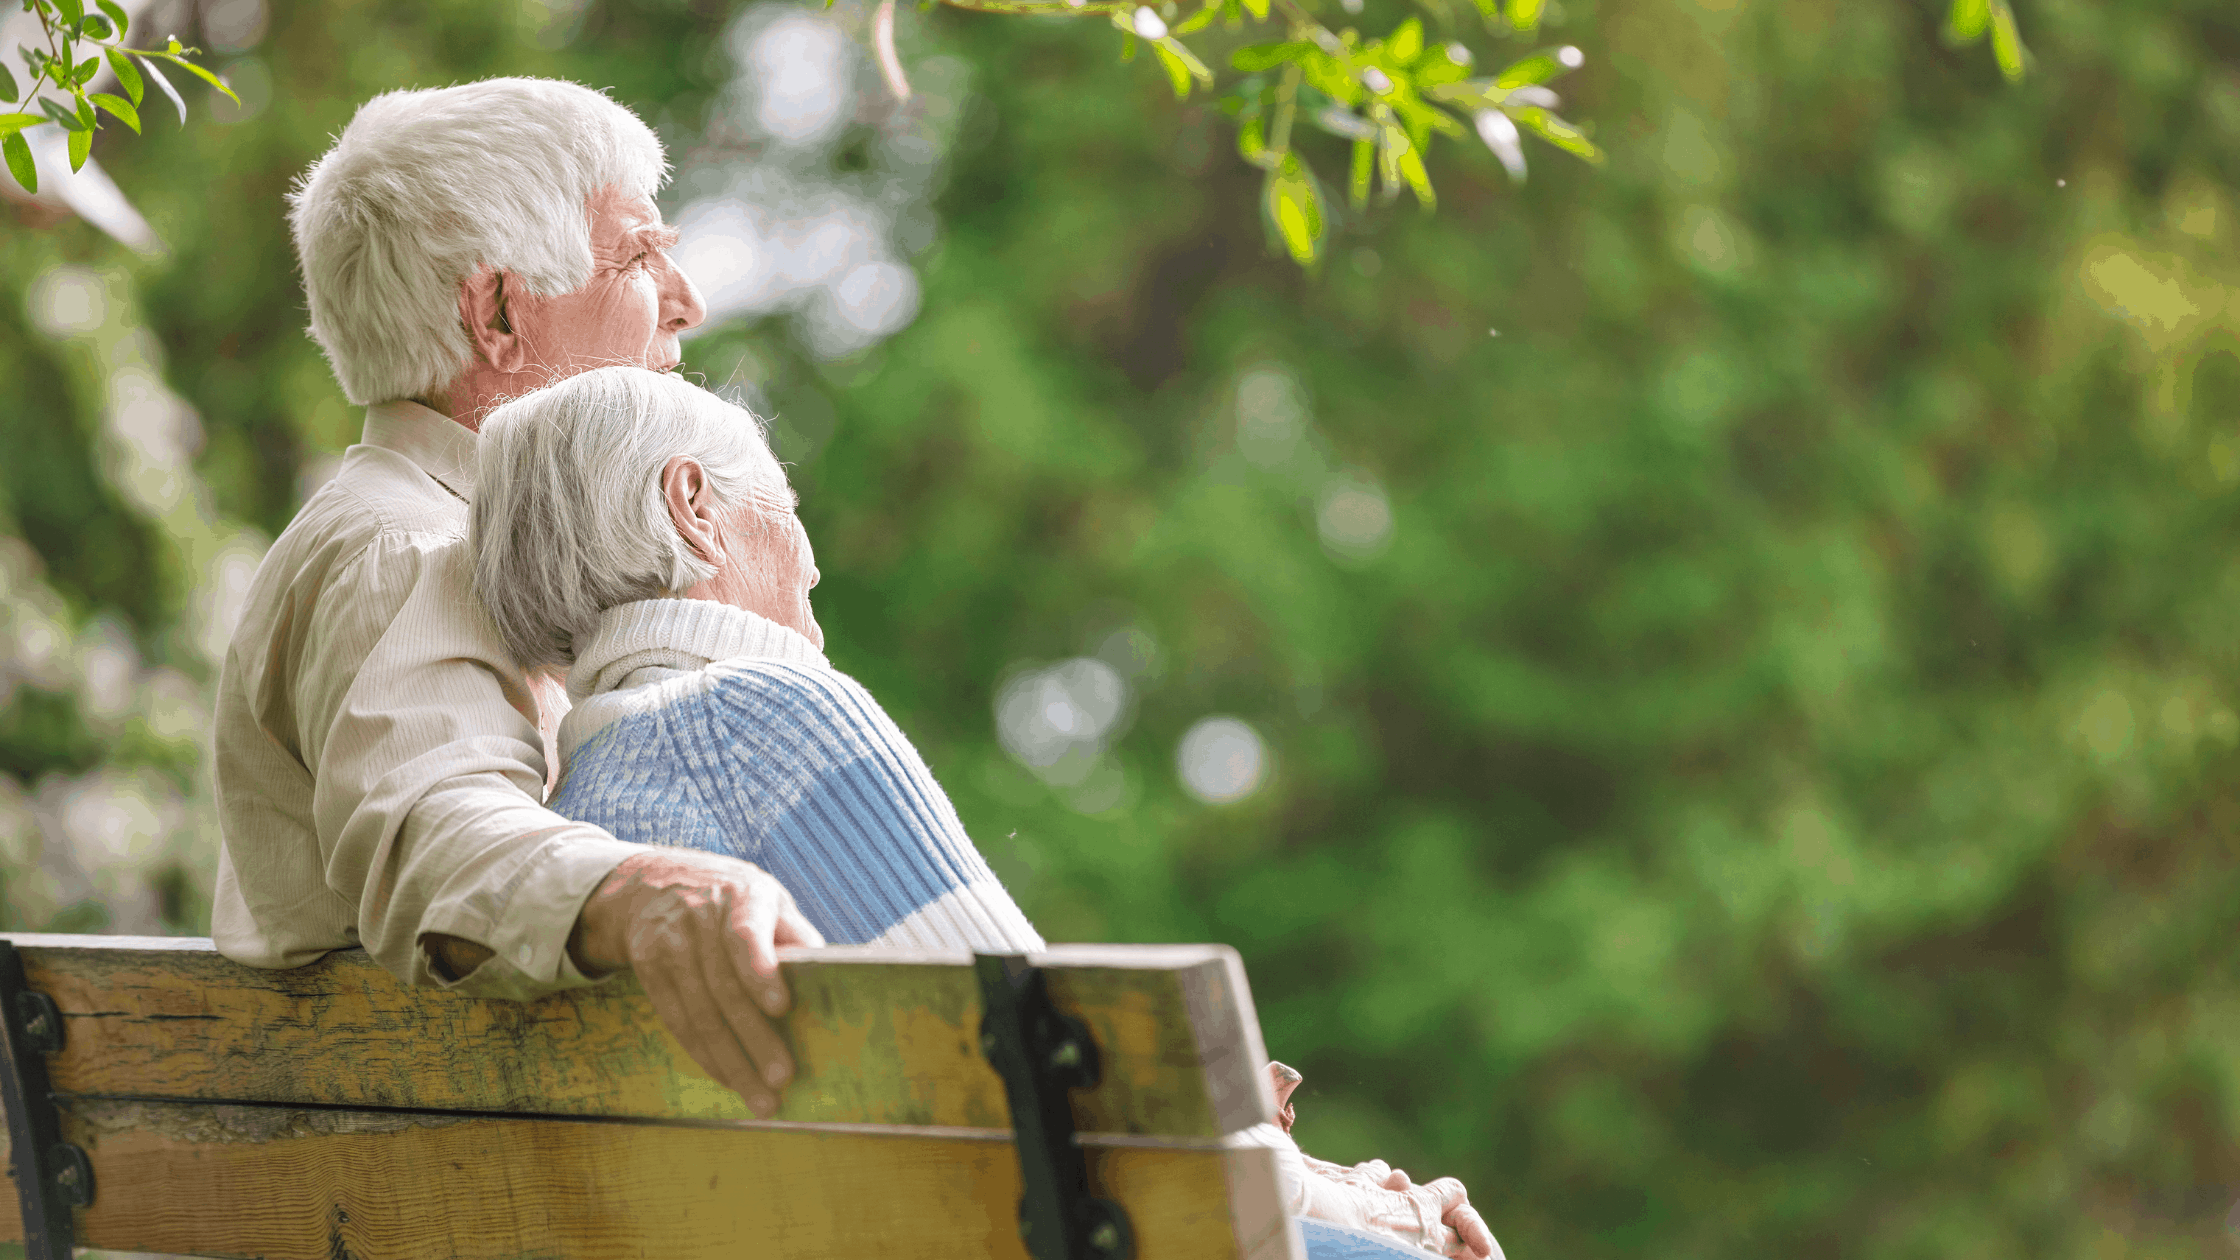 Looking for tips and ideas for caring for elderly parents, here is the ultimate guide to caring for aging parents!